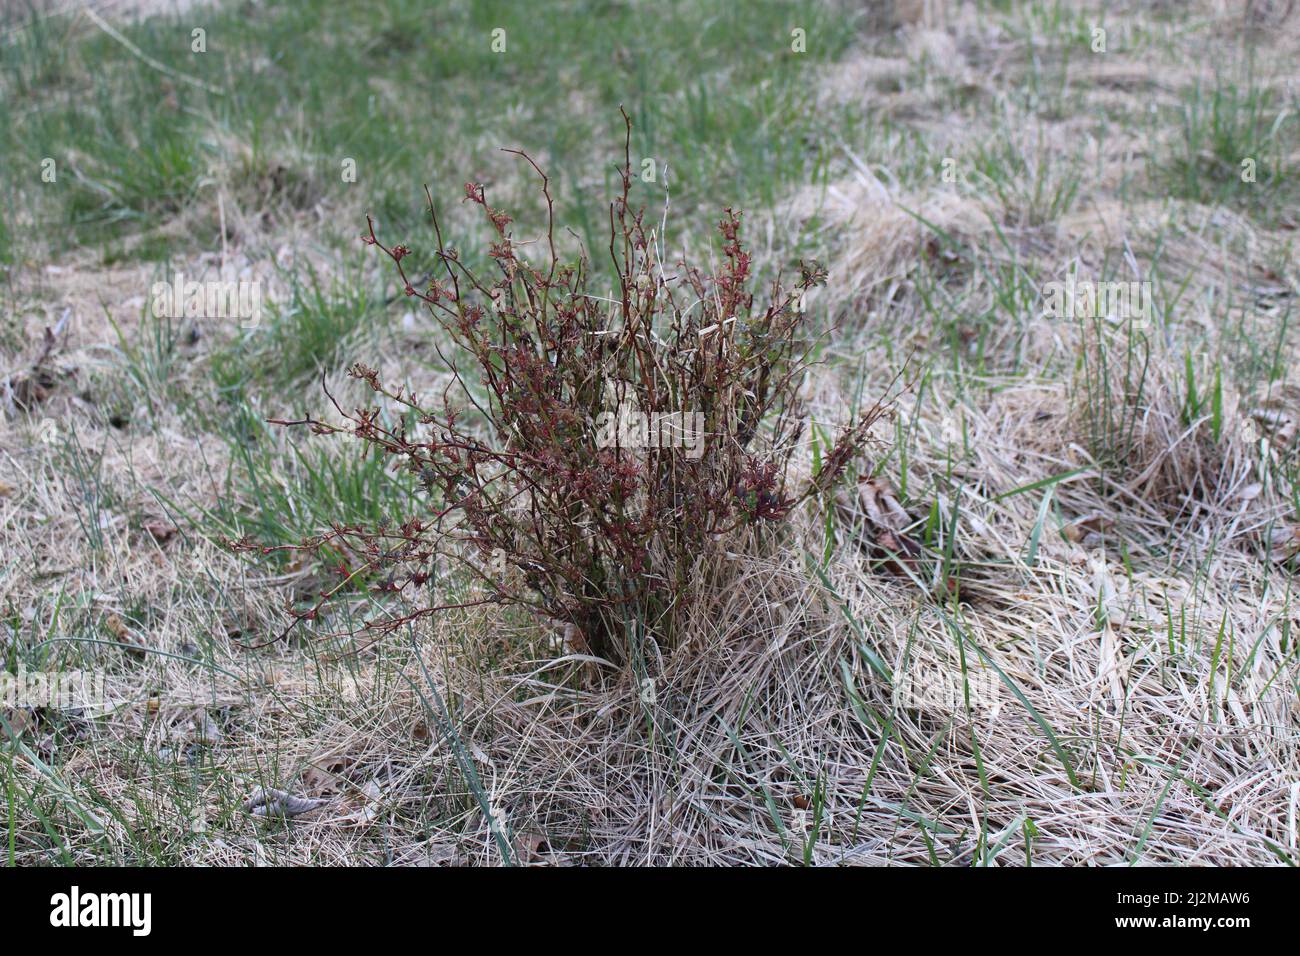 New Red Growth on a Small Wild Rose Plant in Early Spring Stock Photo